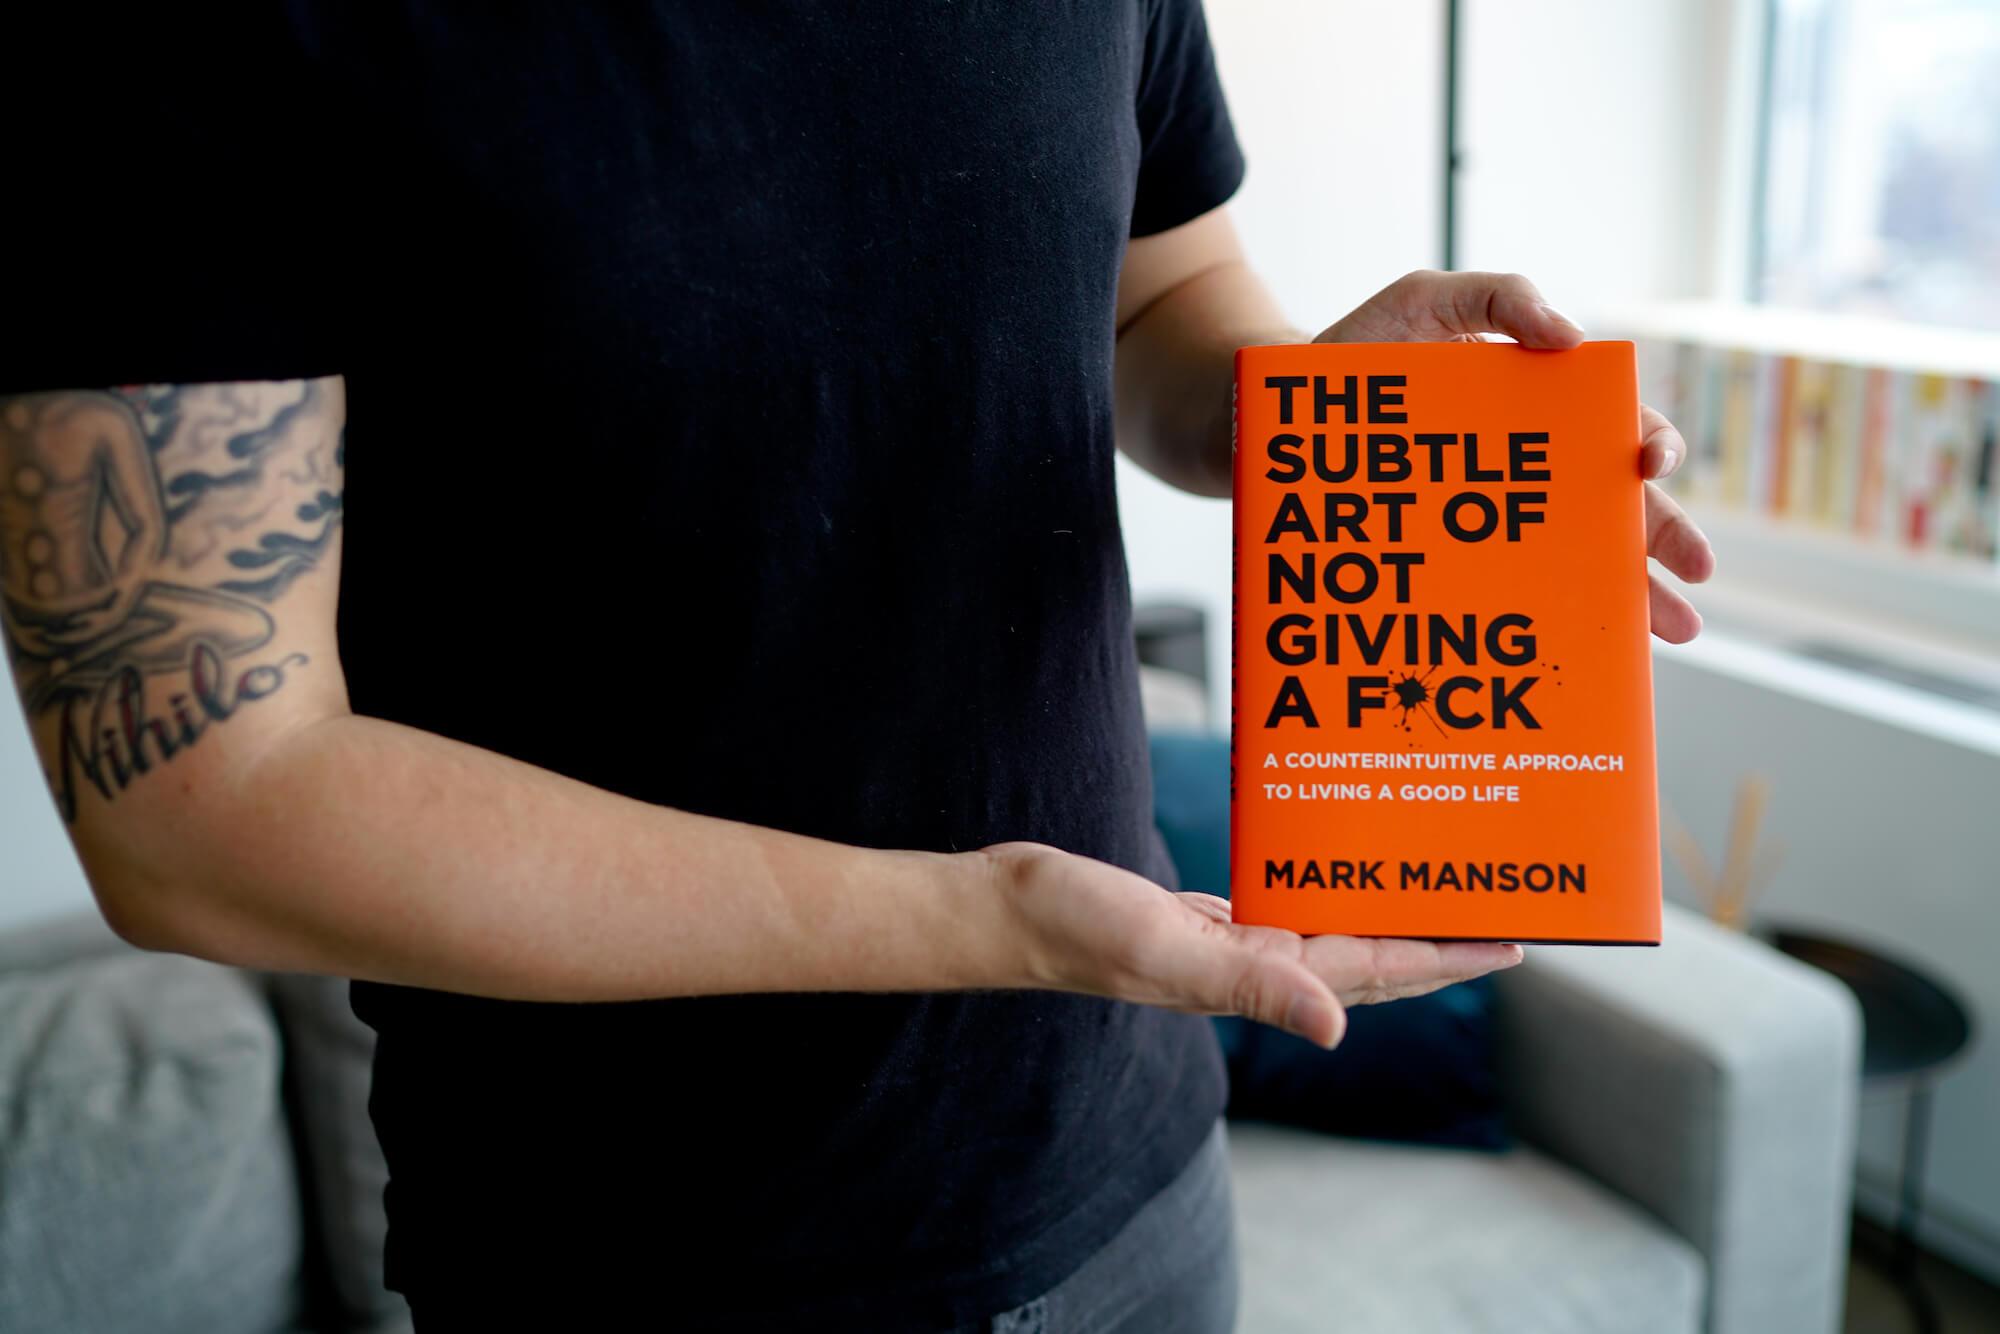 Mark Manson Interview - The Subtle Art of Not Giving a F*ck